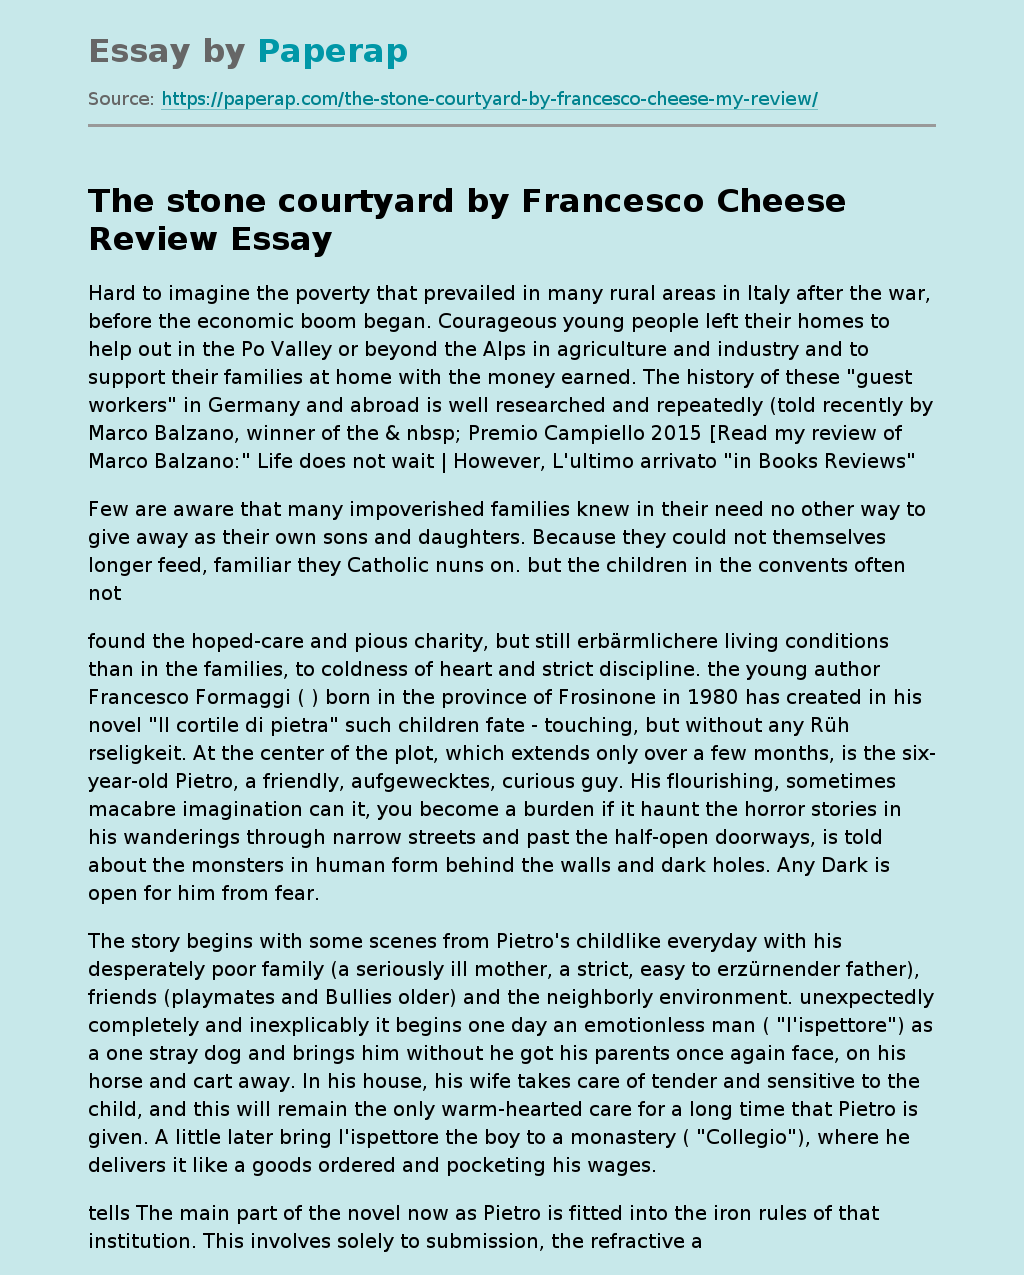 “The Stone Courtyard” by Francesco Cheese